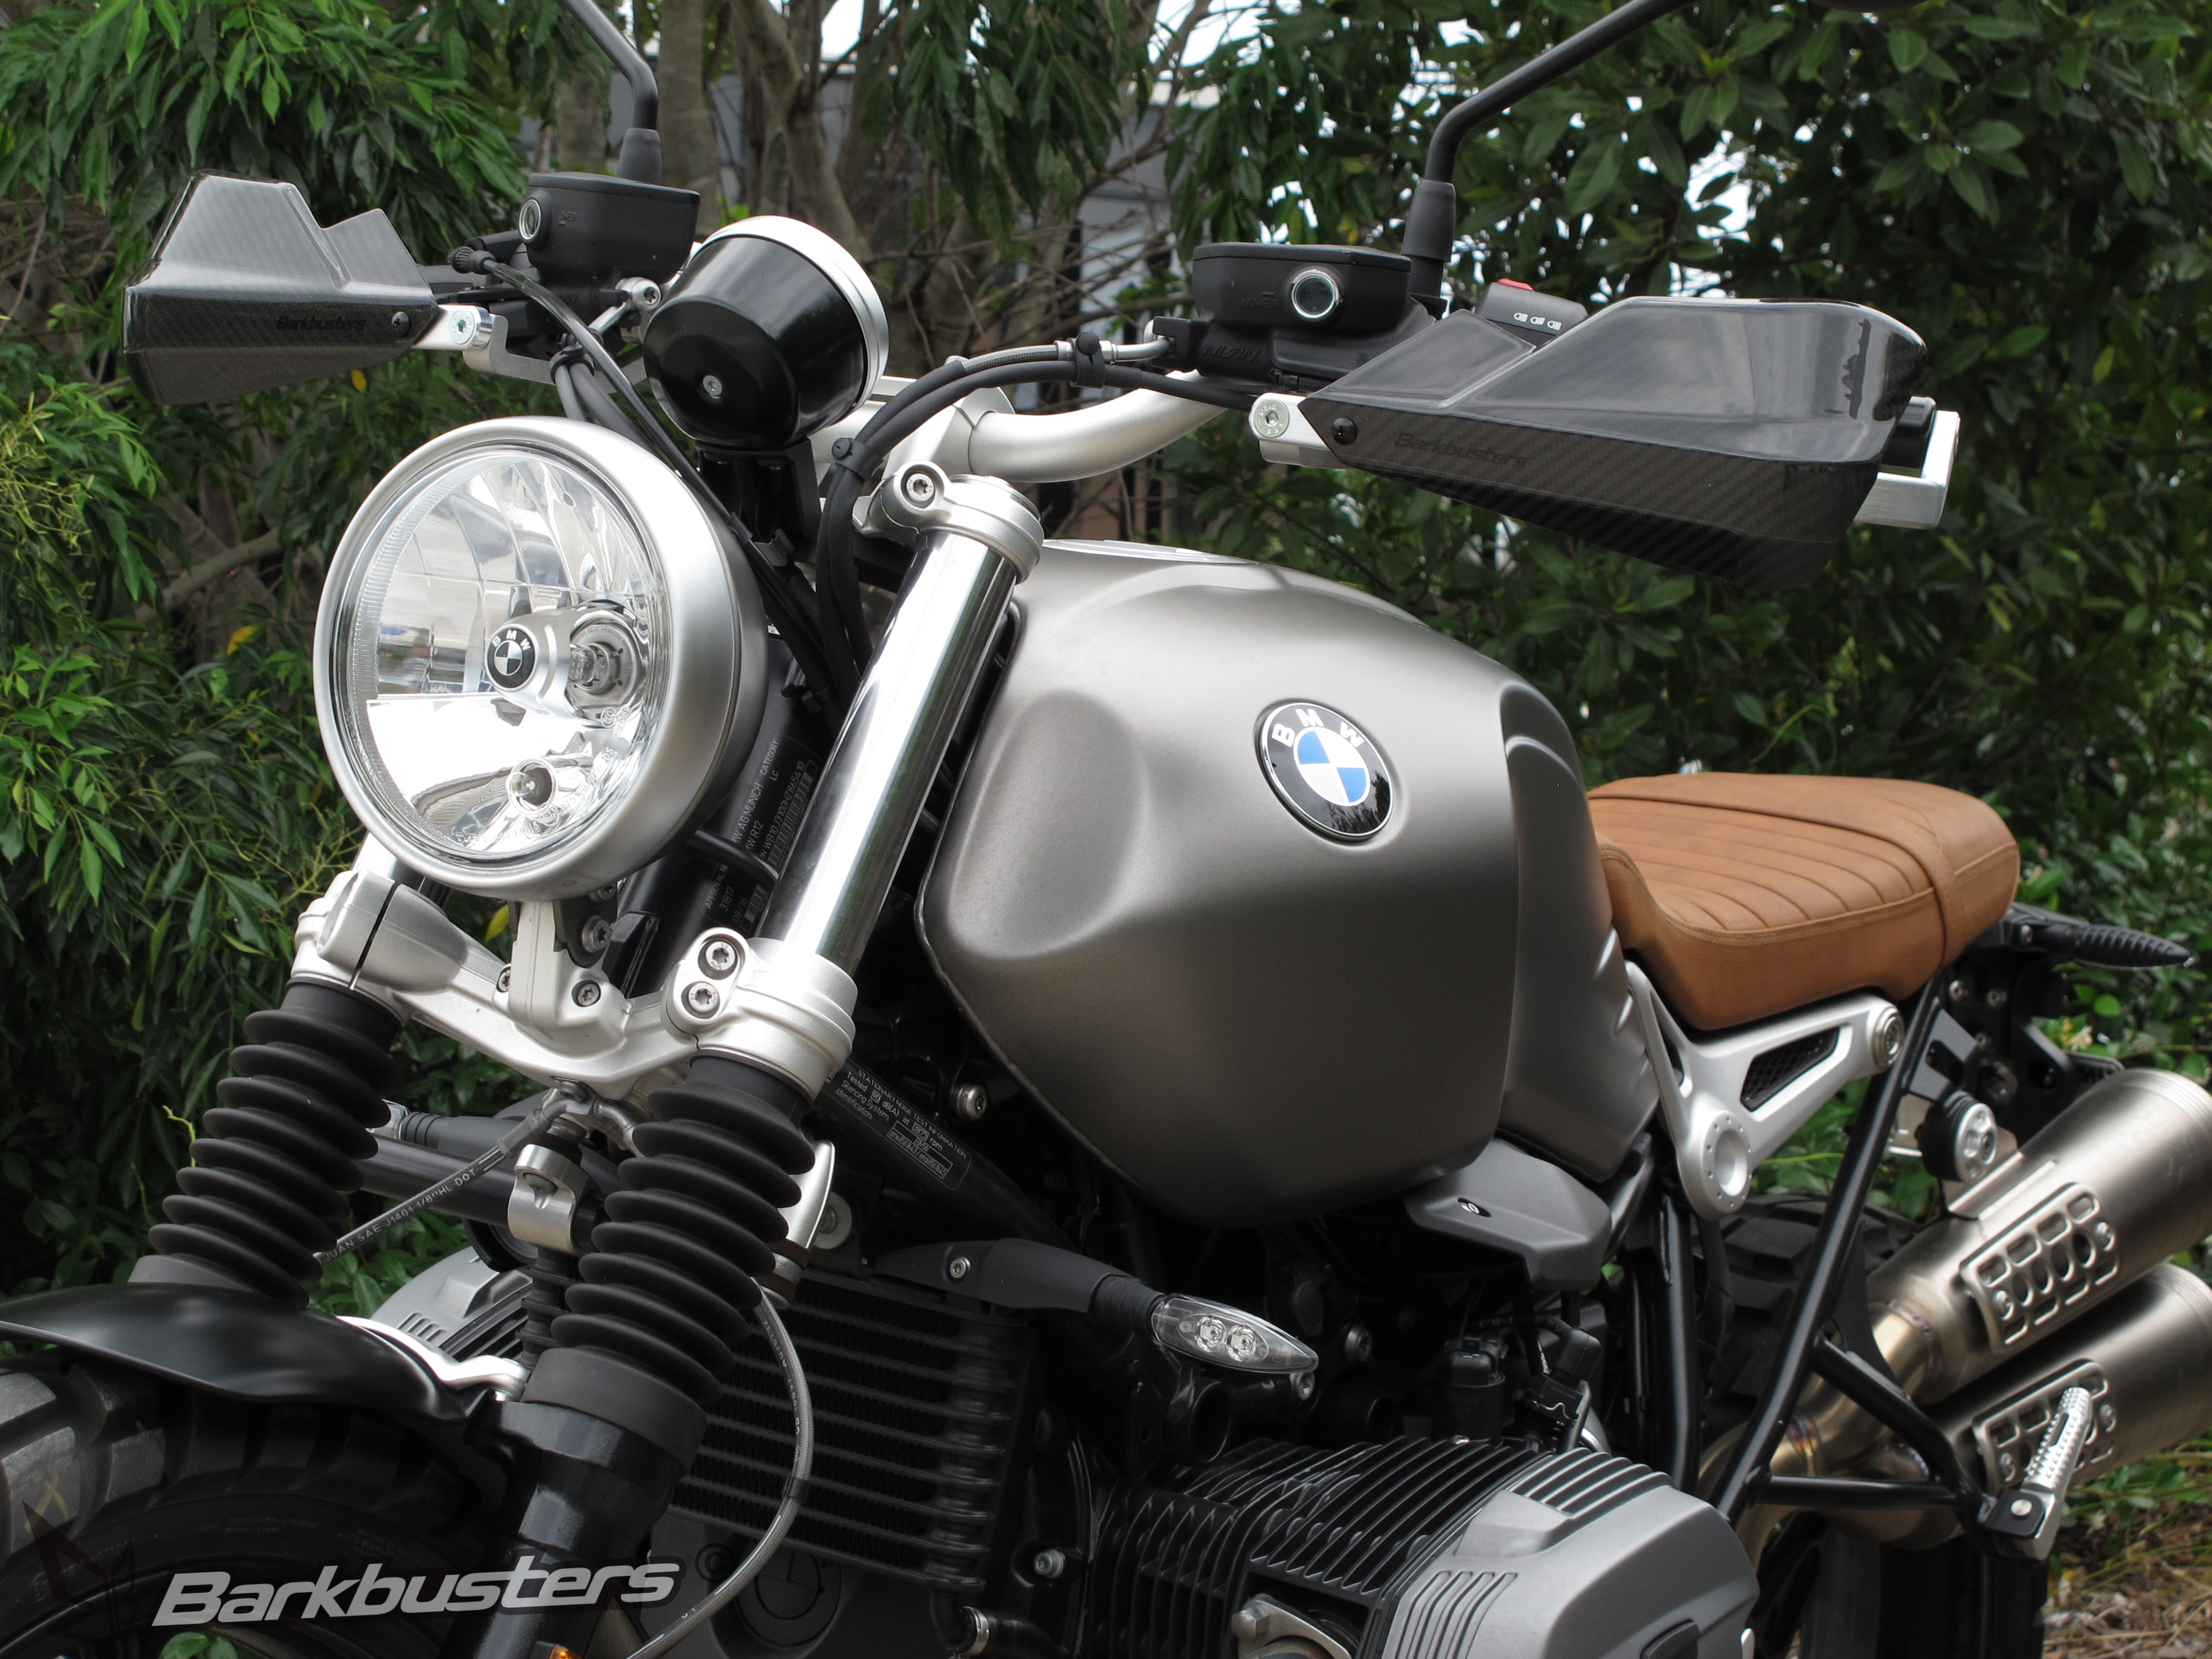 BARKBUSTERS Handguard Hardware Kit (Code: BHG-064) fitted to BMW R Nine T Scrambler with Black CARBON Guards (Code: BCF-003-BK) sold separately